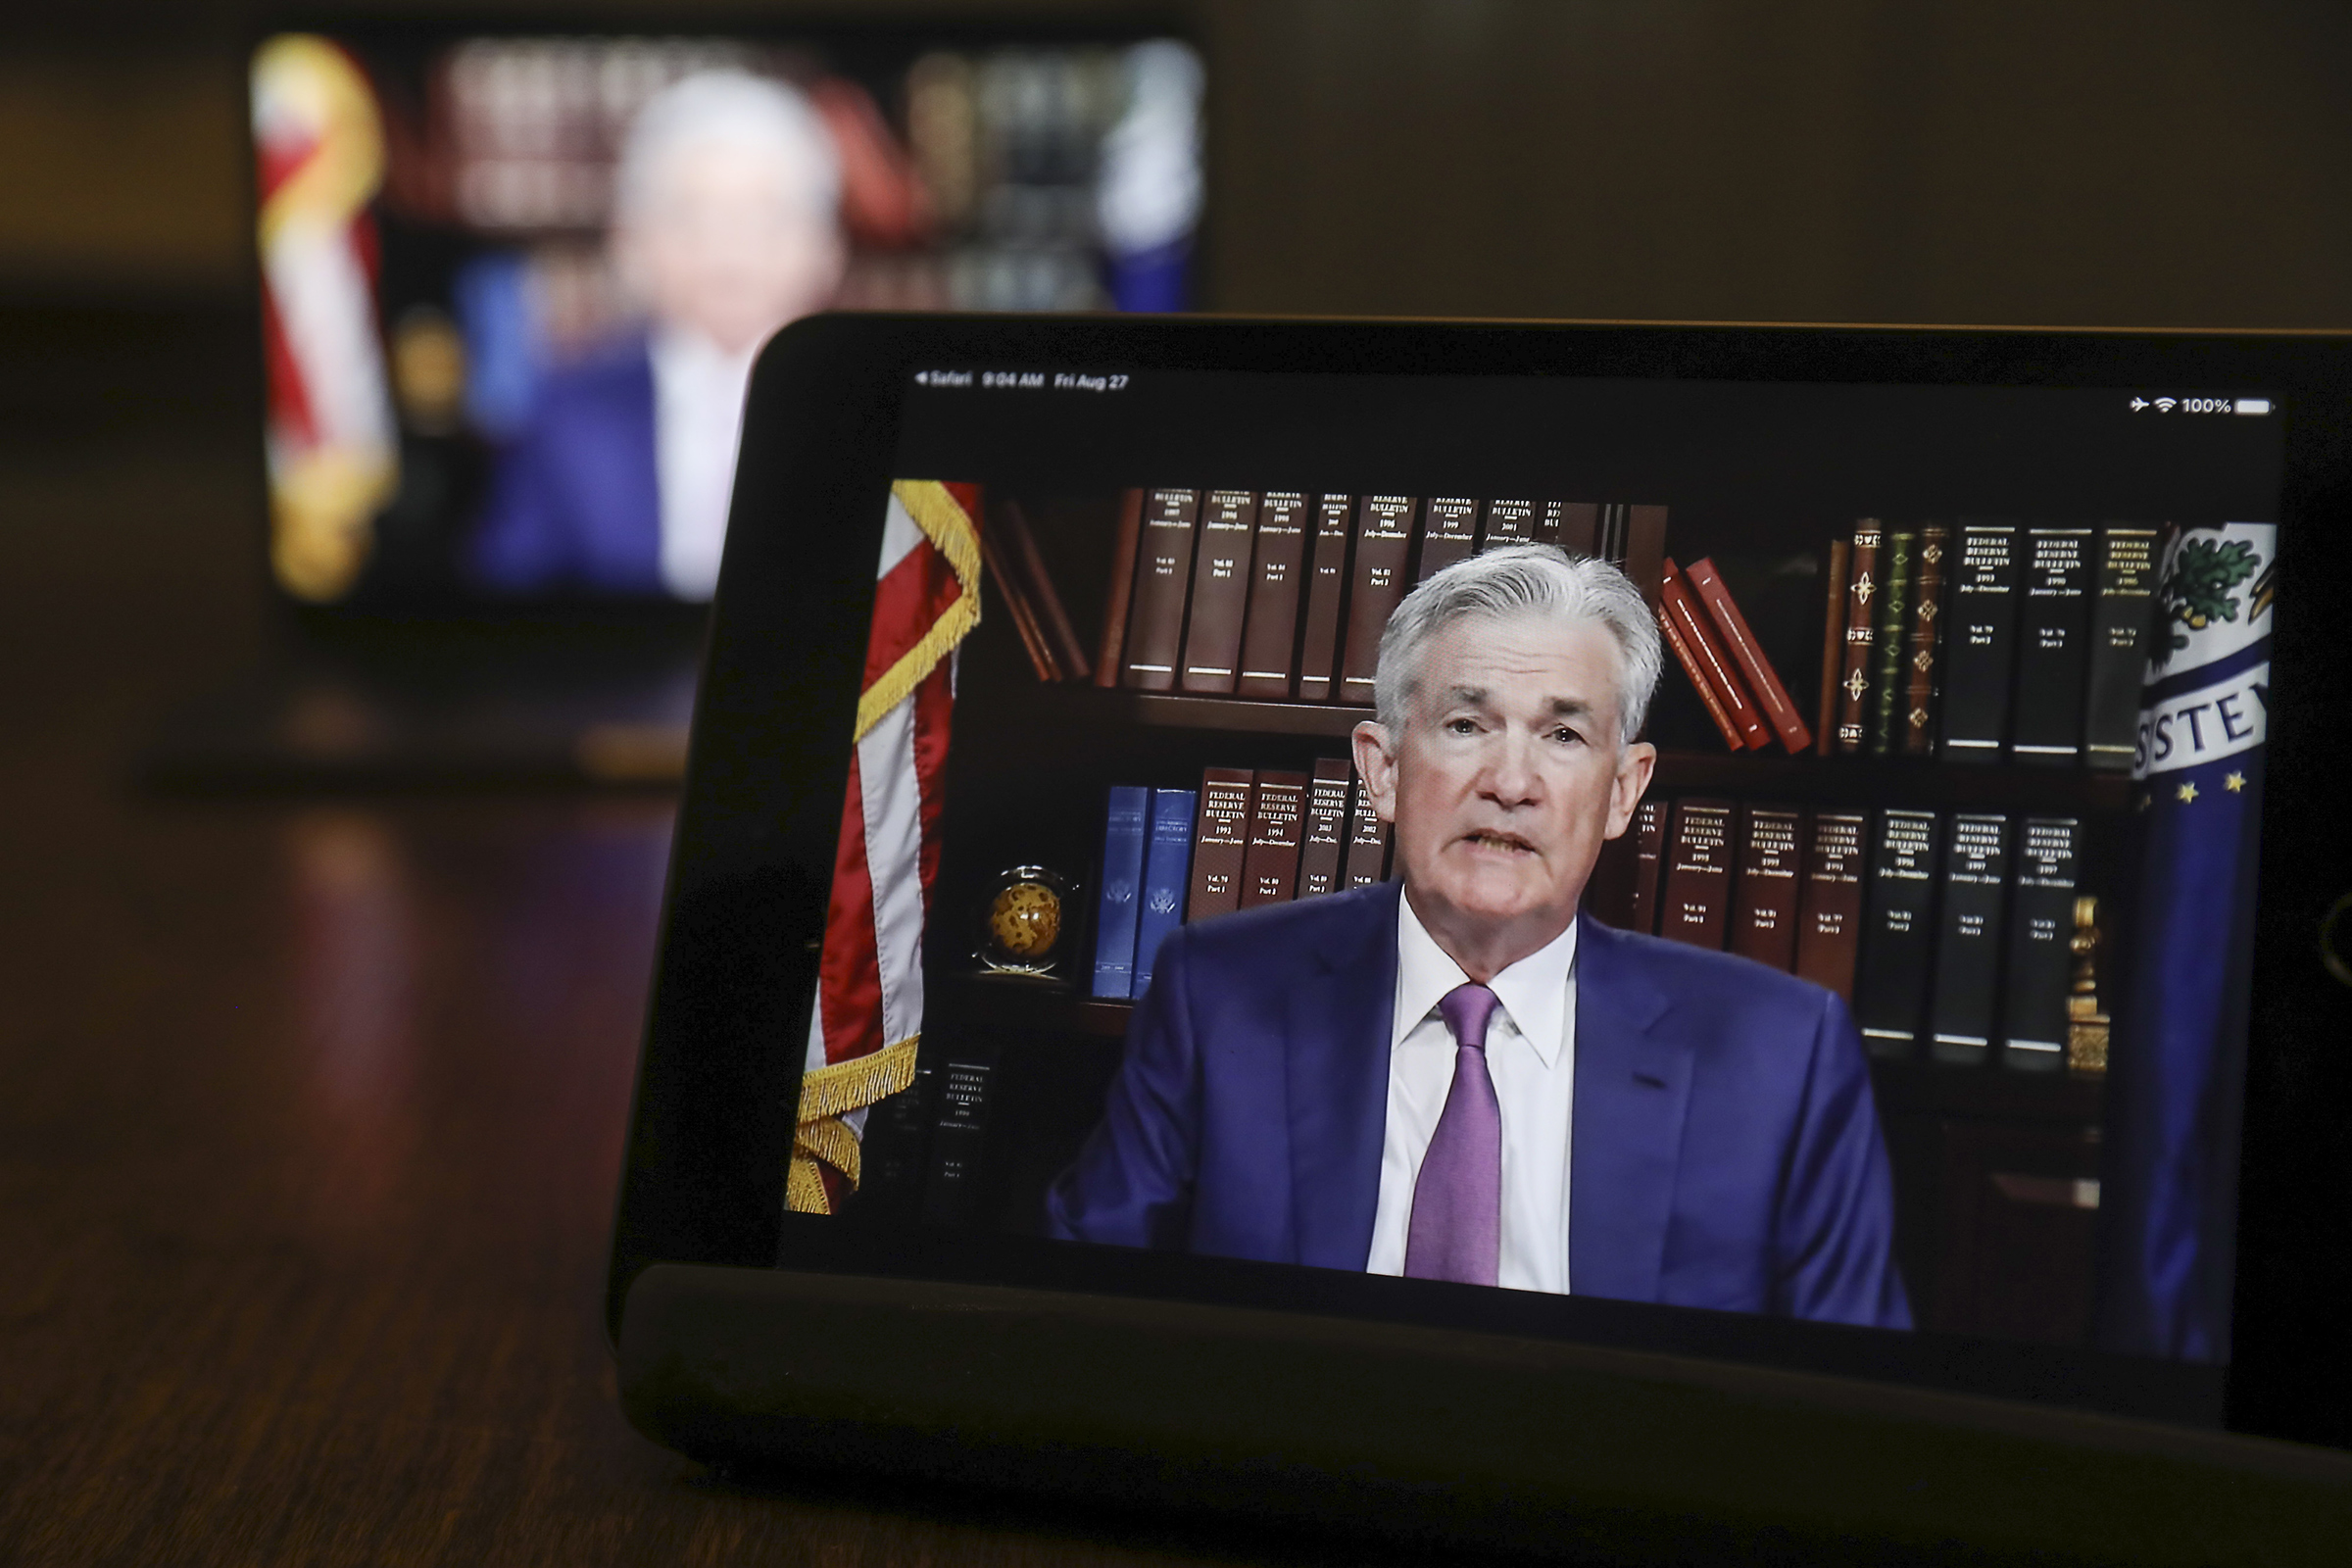 Jerome Powell, chairman of the U.S. Federal Reserve, speaks virtually during the Jackson Hole economic symposium in Tiskilwa, Ill. on Aug. 27. (Daniel Acker—Bloomberg/Getty Images)